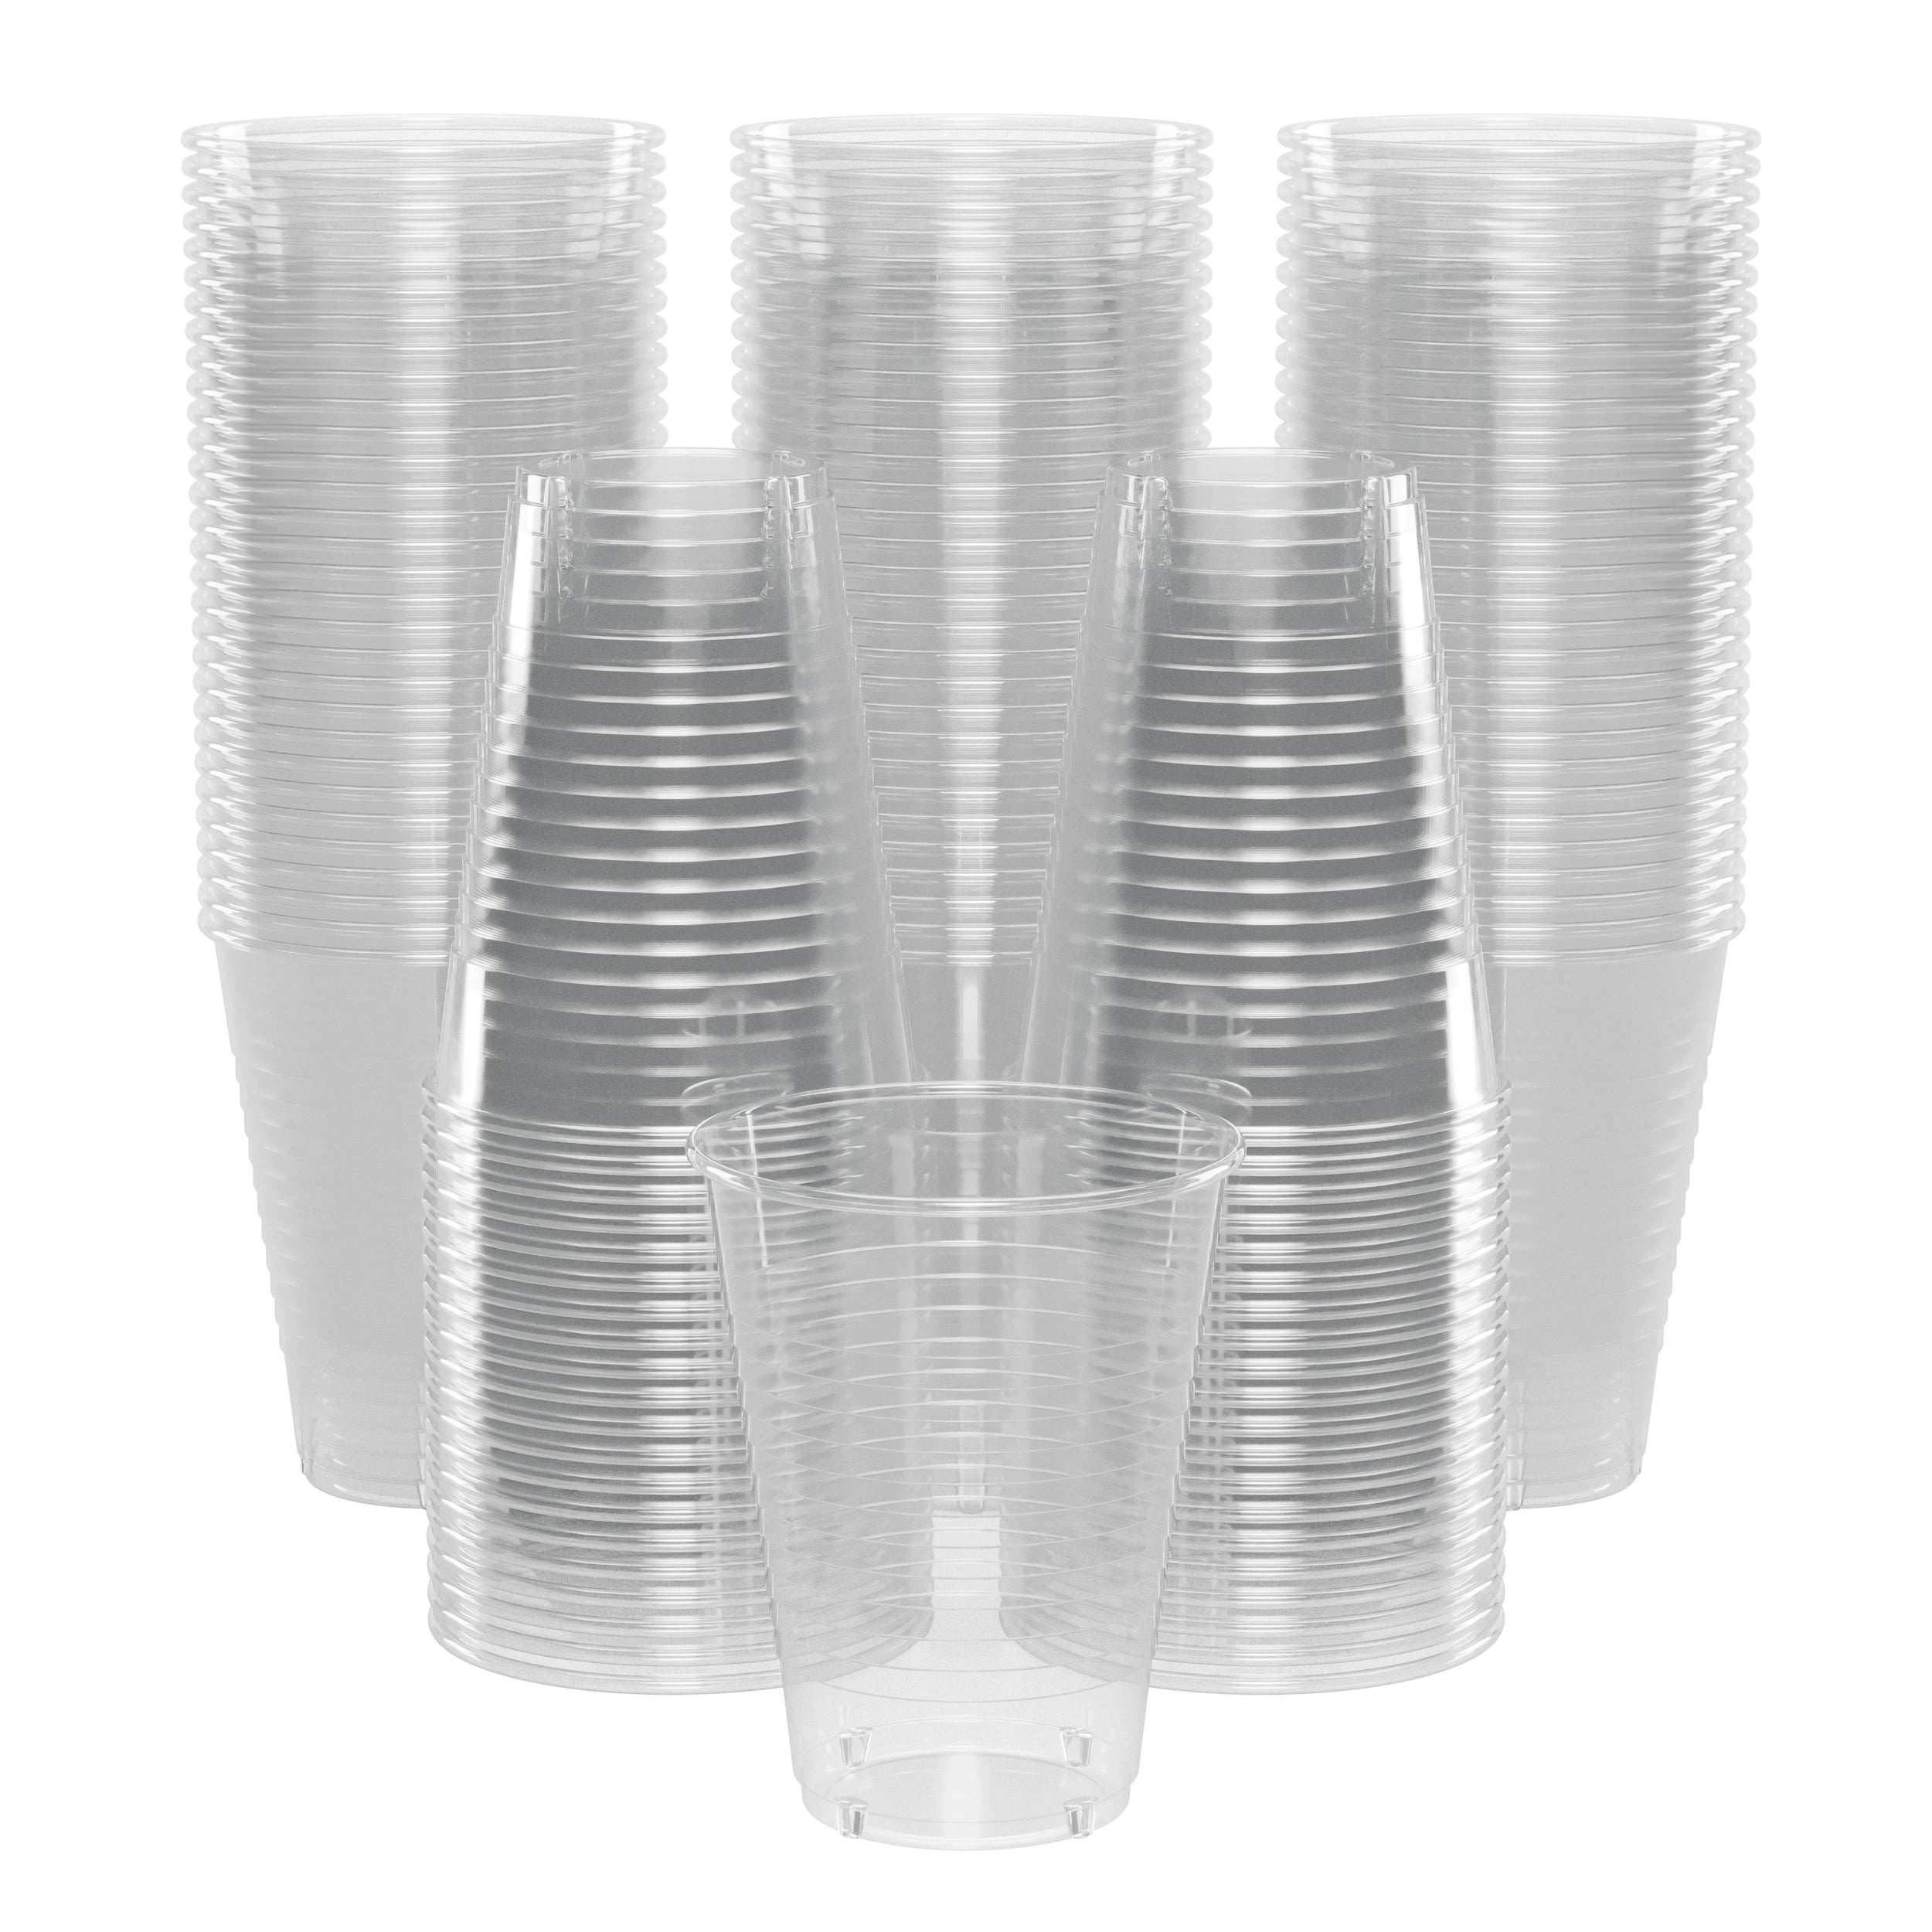 Buy Wholesale Disposable Plastic Cups in Bulk at Competitive Prices